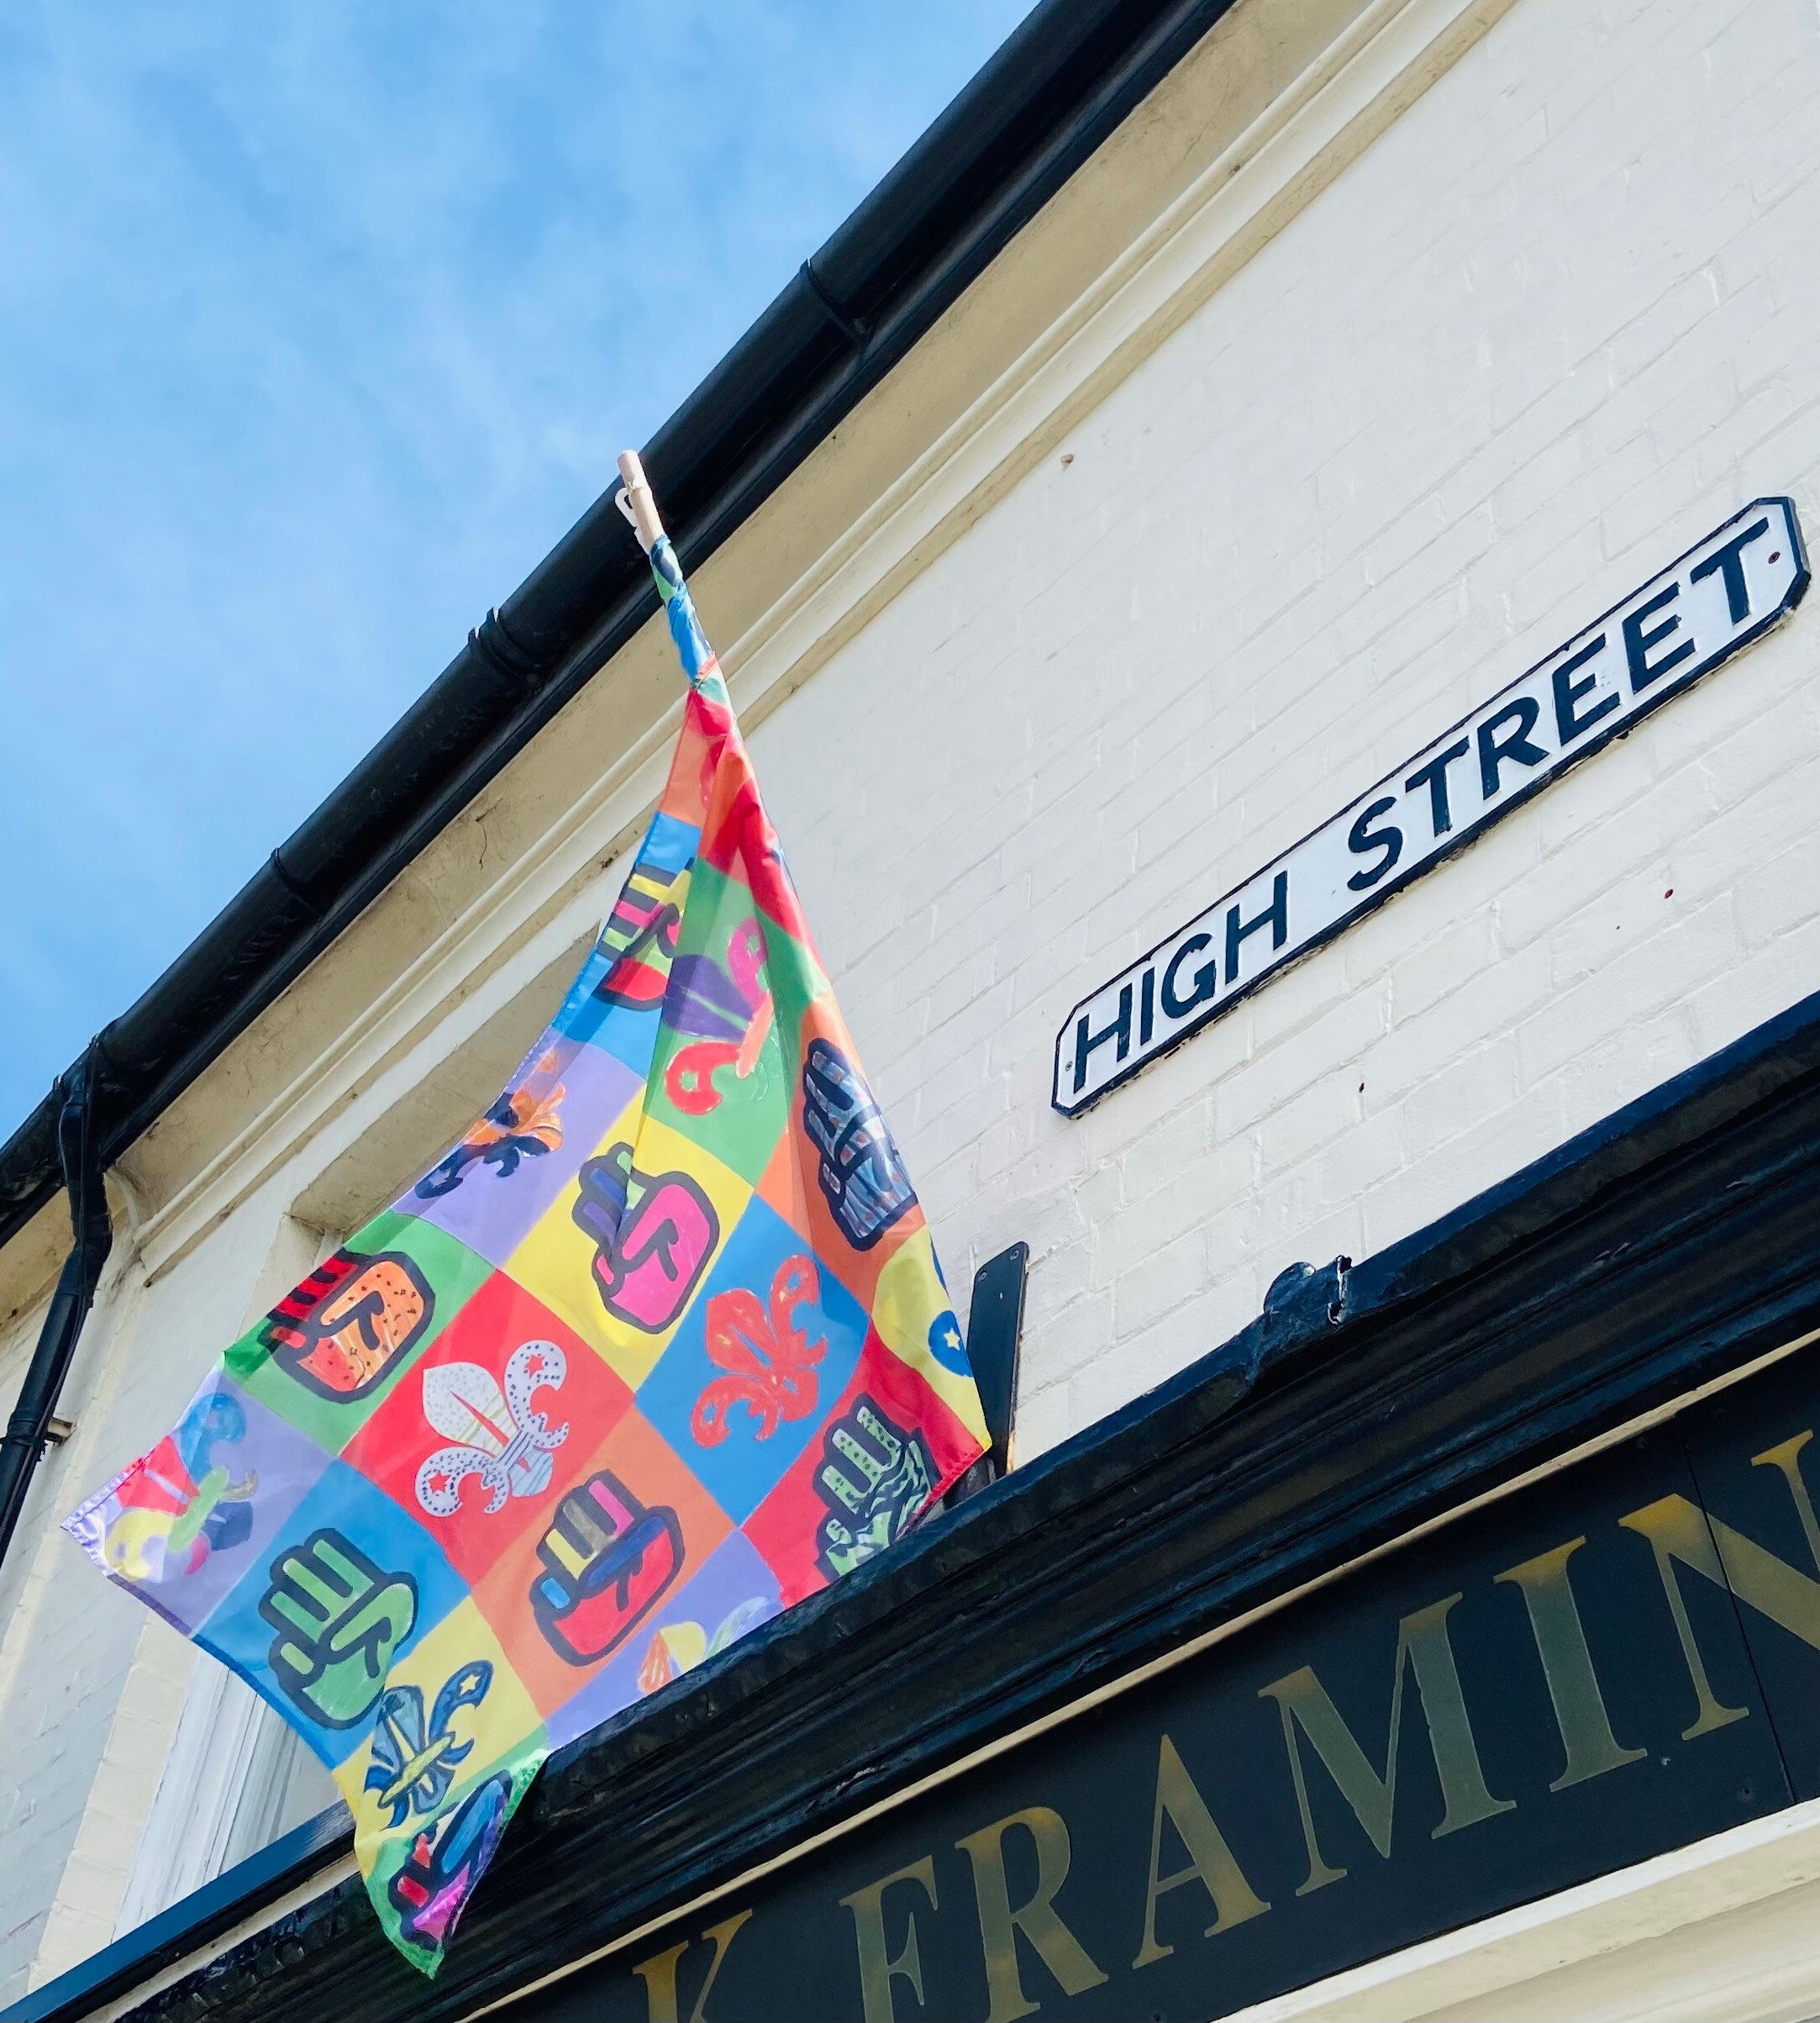 A colourful flag flying on a flagpole mounted onto a building with a High Street sign next to it